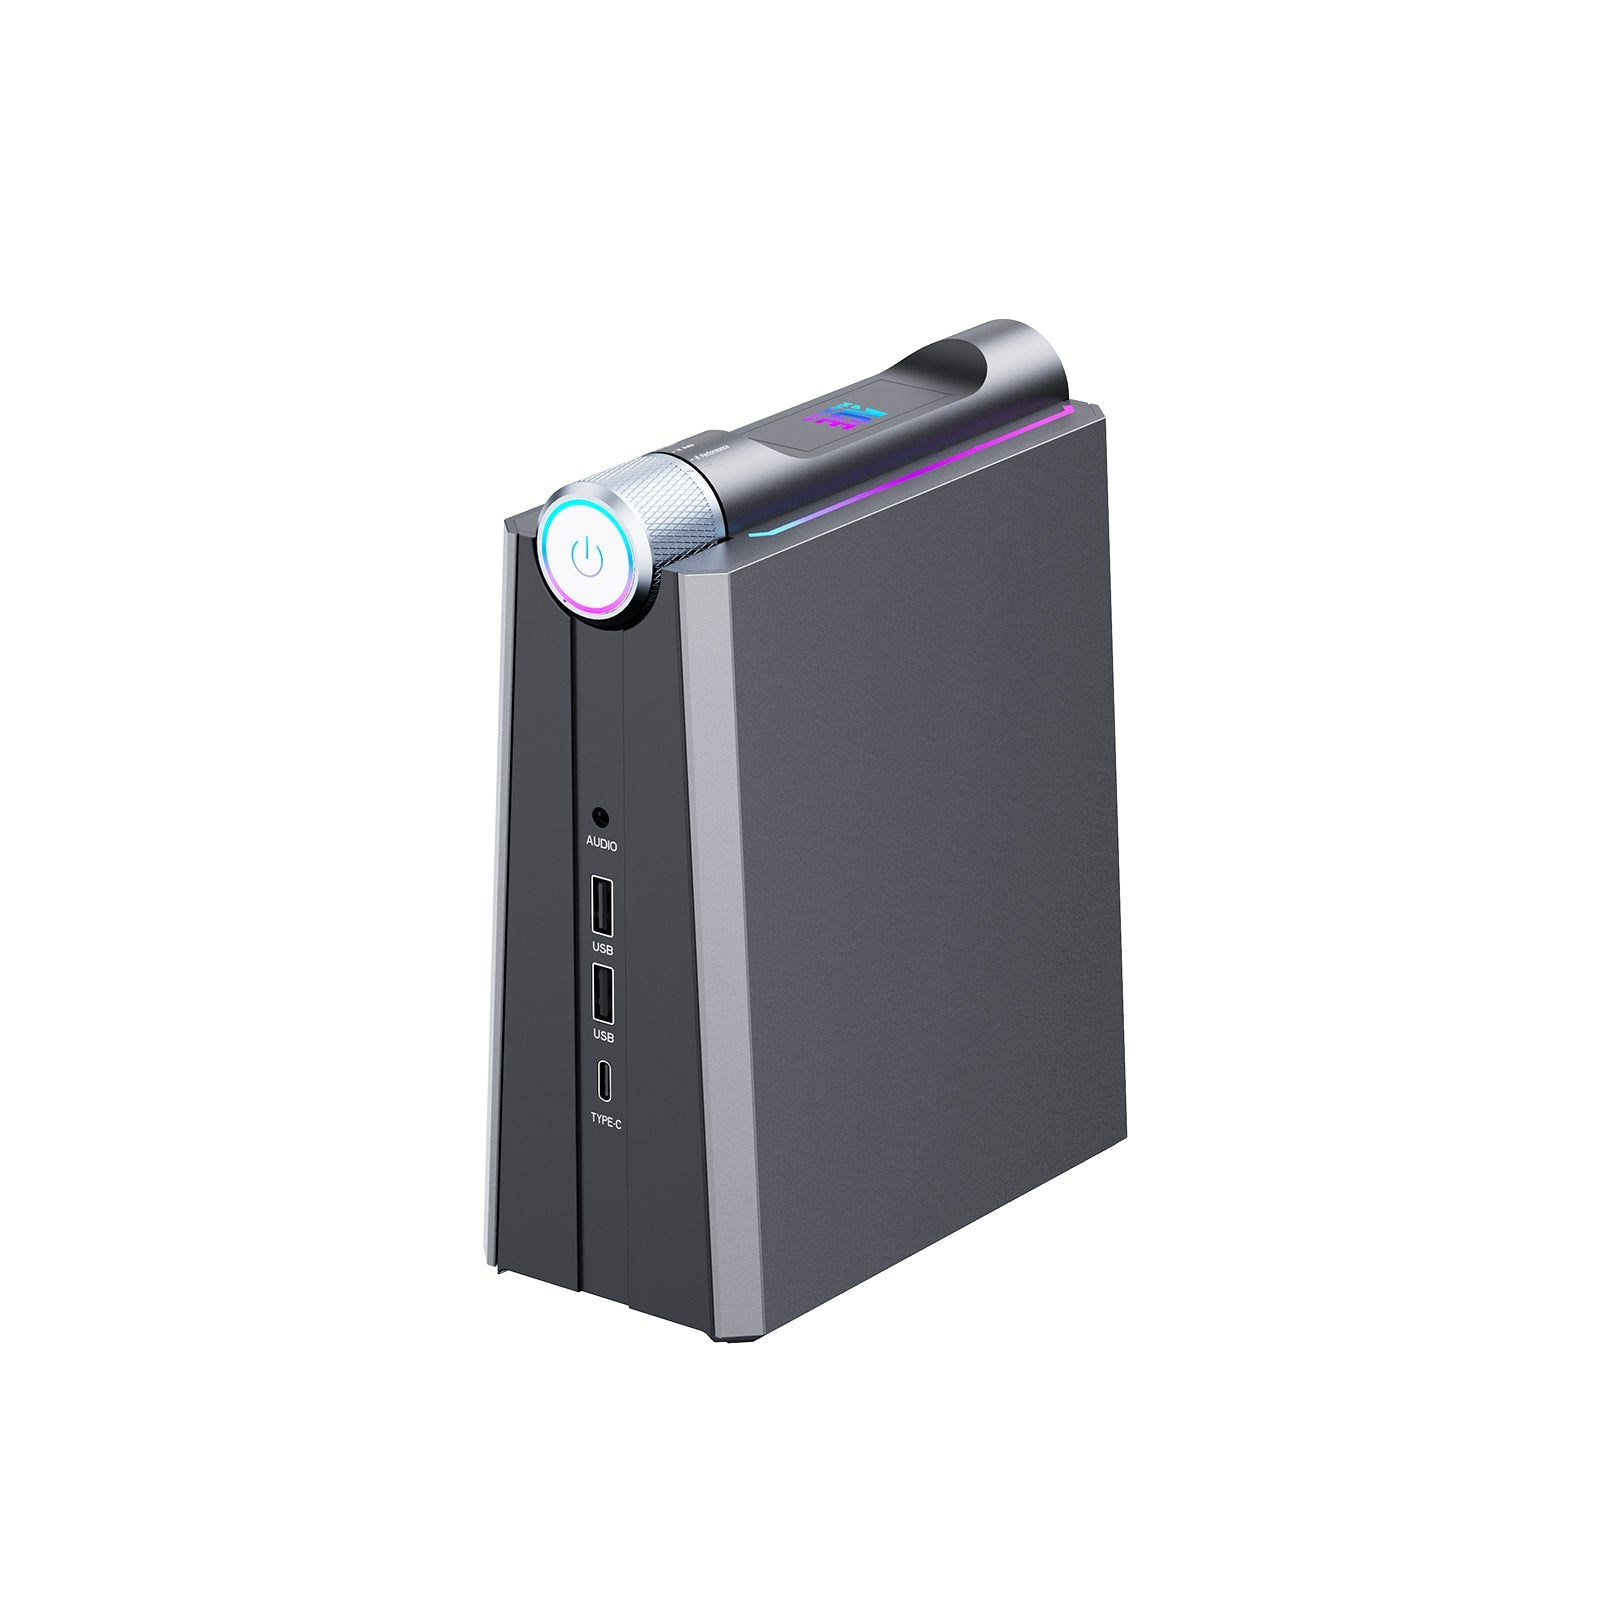 📢ACE AM08 Pro Mini PC Finally available in stock!🤩 🥳